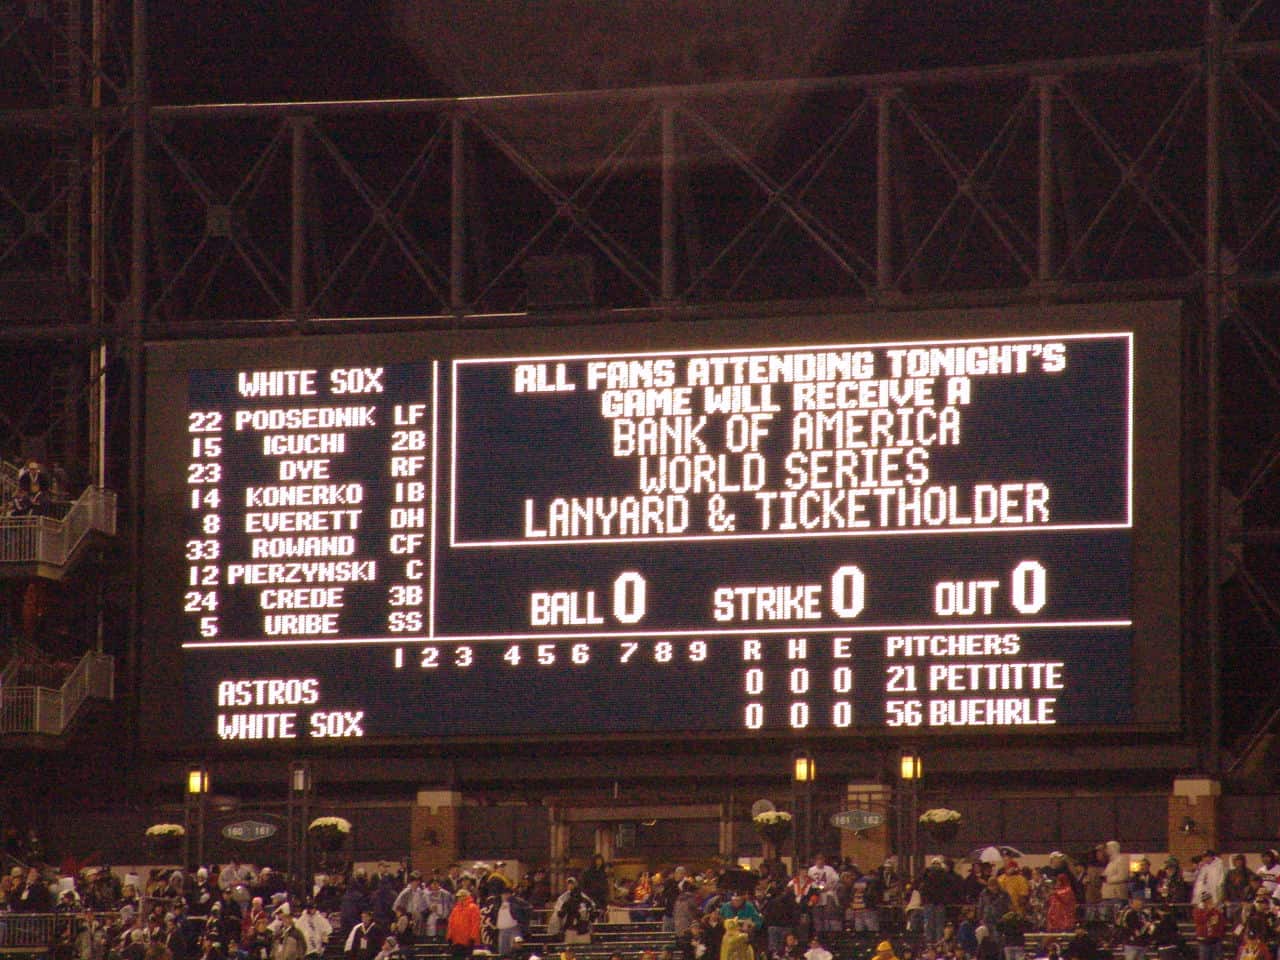 Game 2 of the 2005 World Series at US Cellular Field in Chicago, Illinois